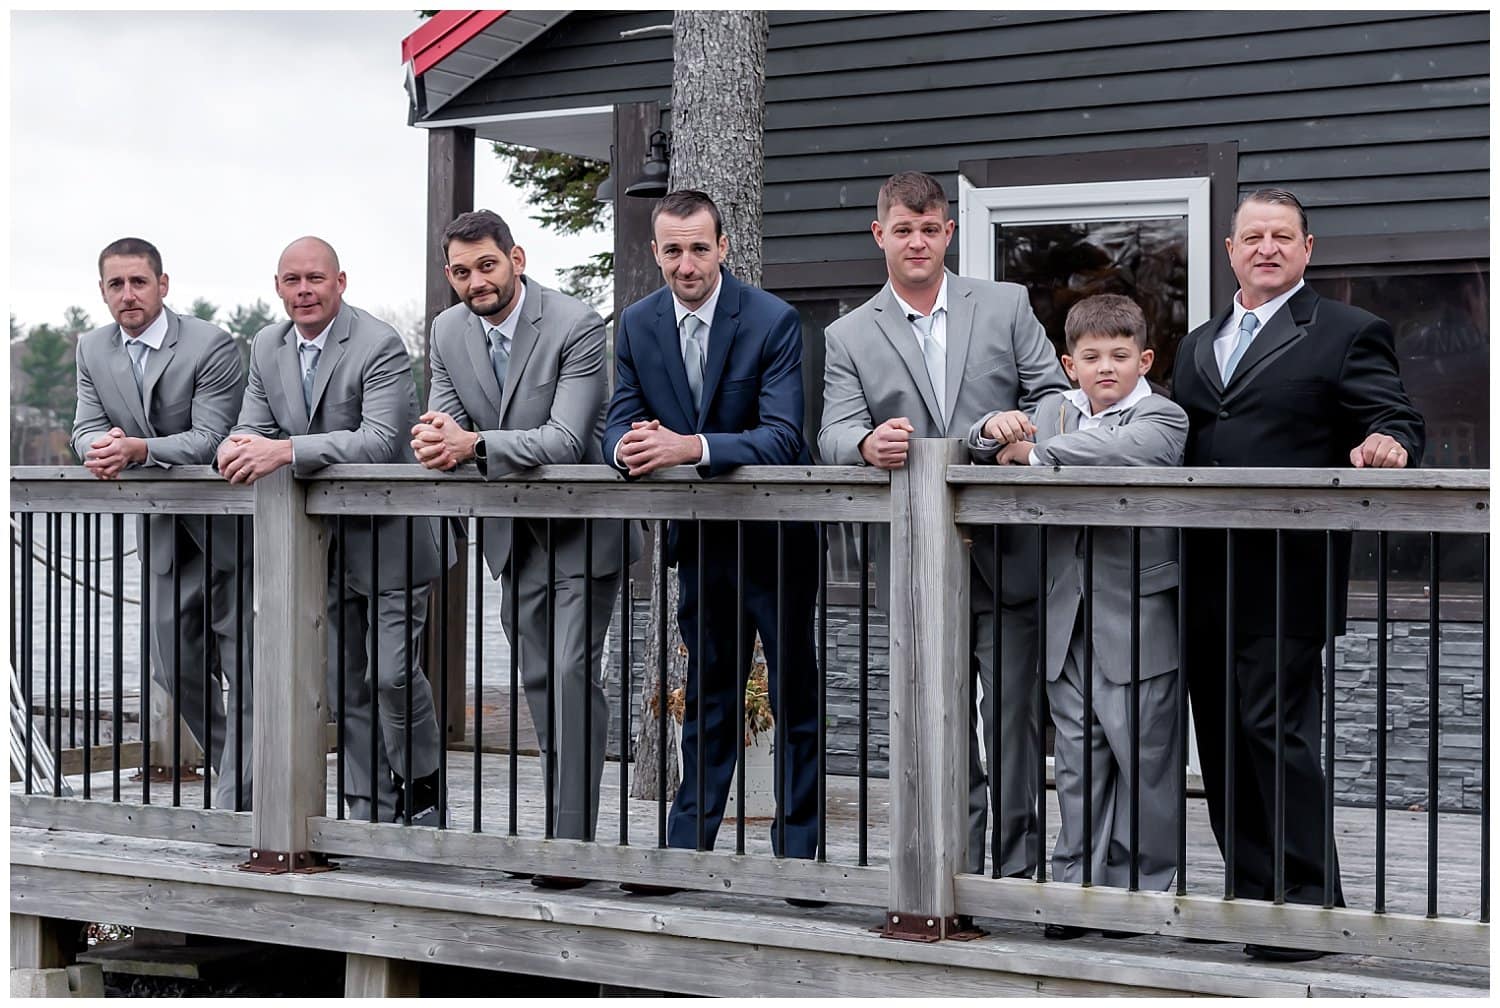 The groom and groomsmen pose for wedding photos at an Airbnb in Mt Uniacke NS.